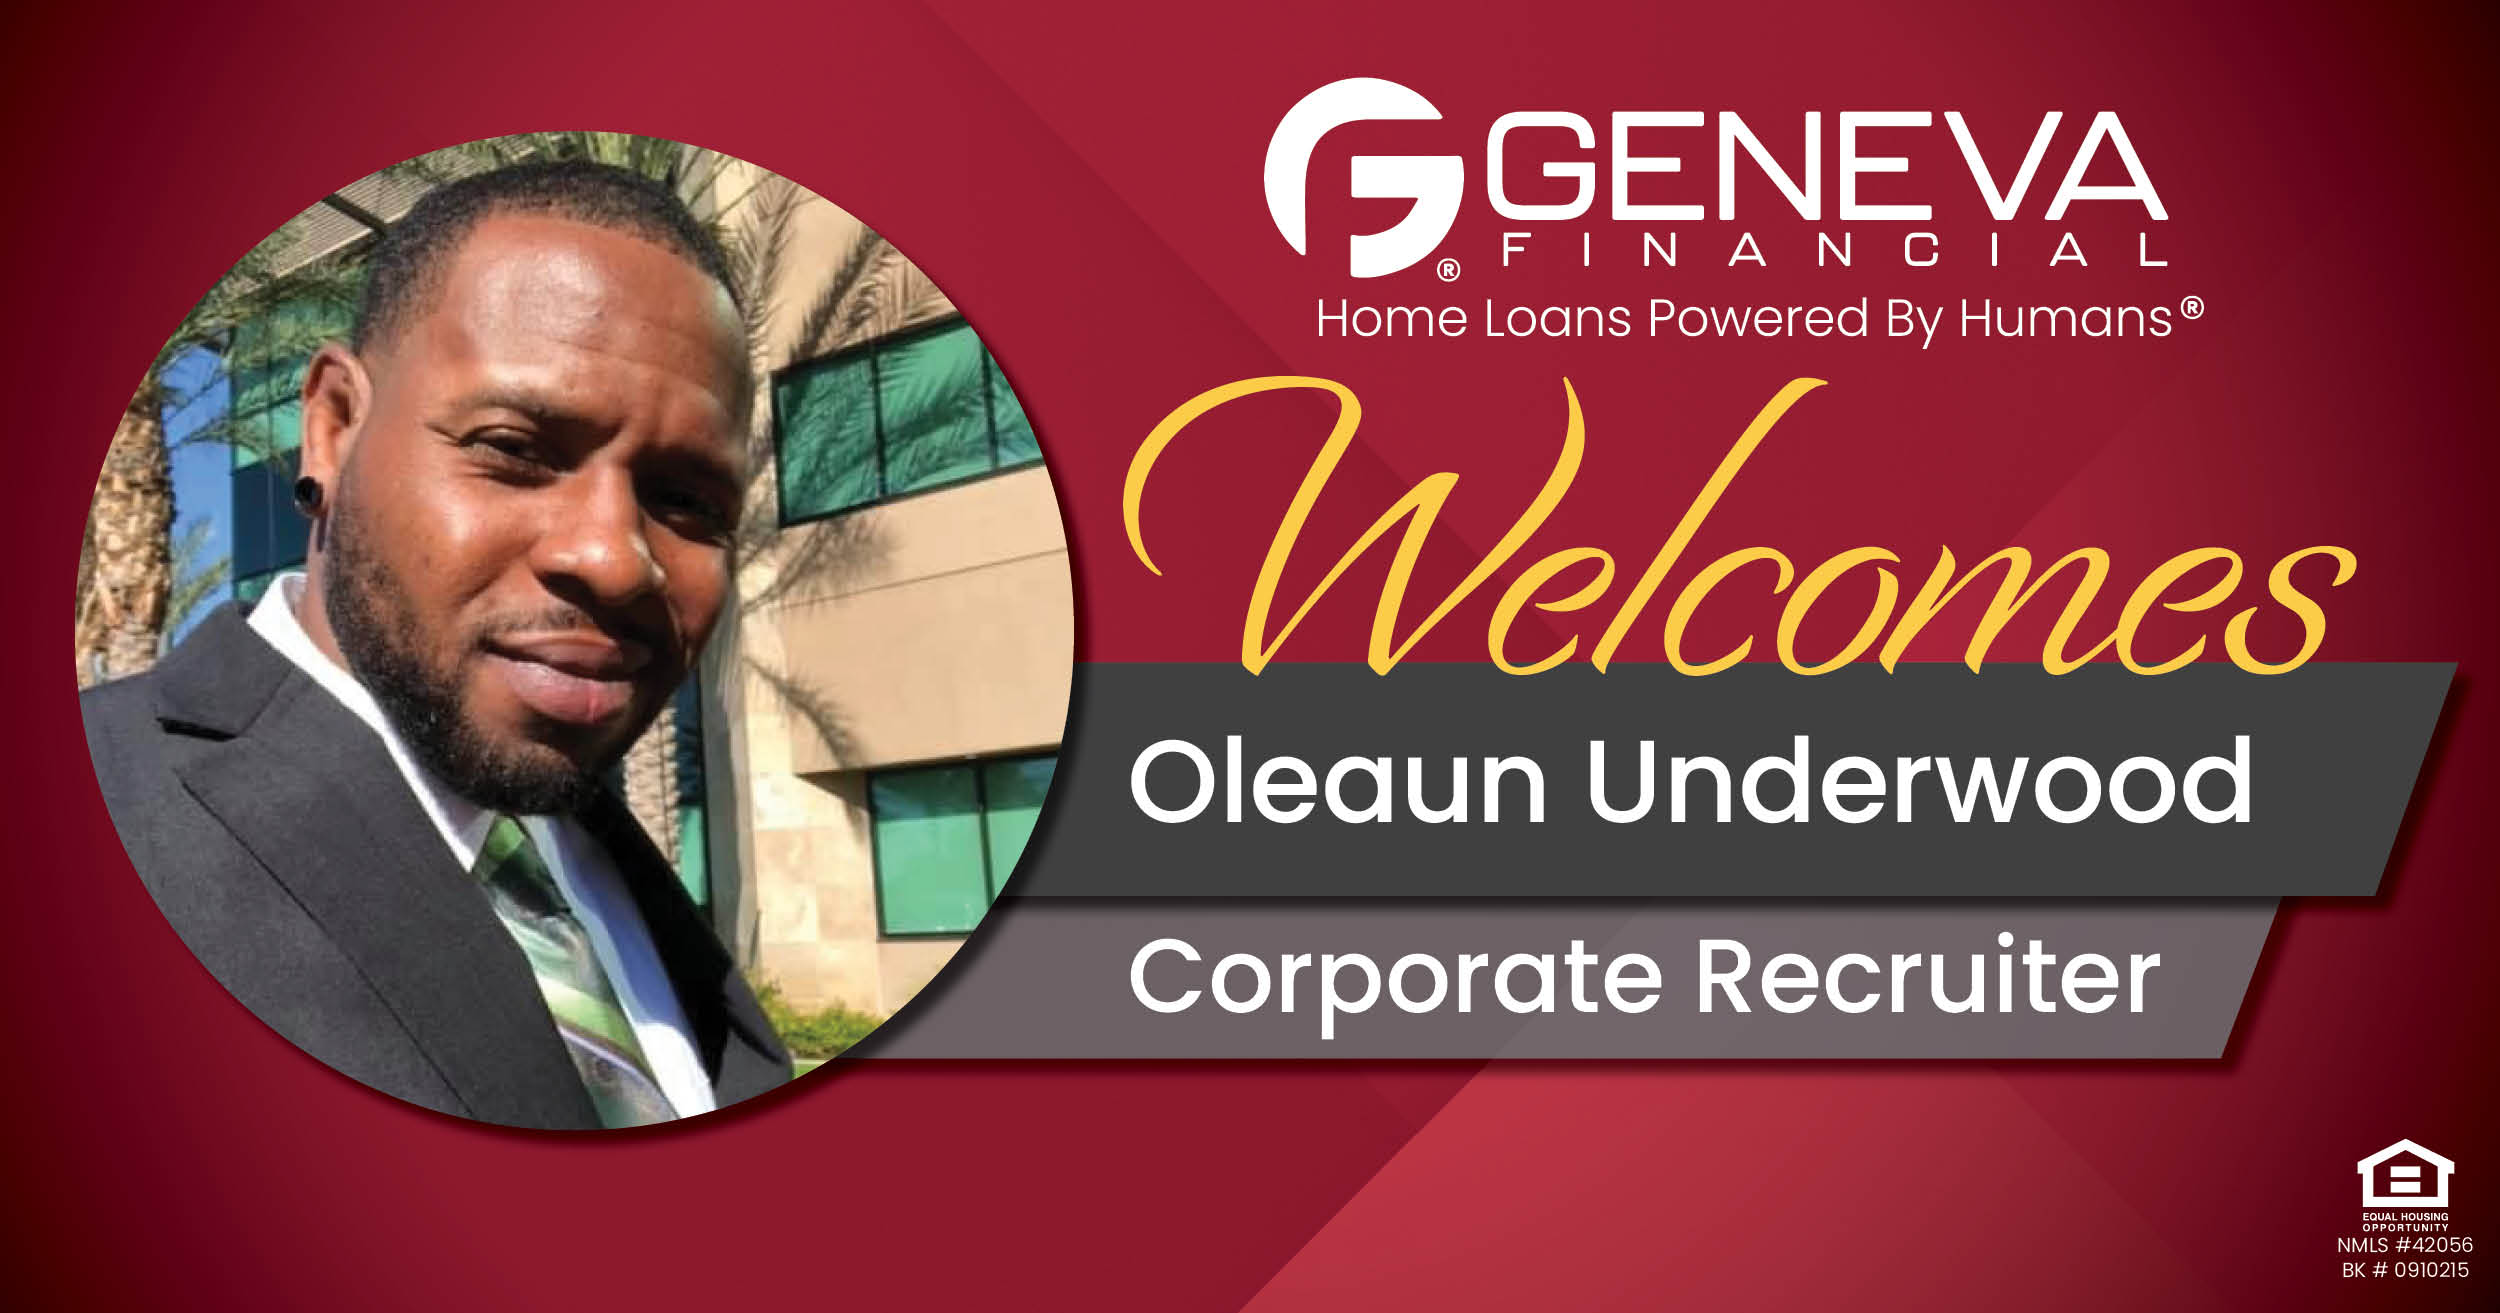 Geneva Financial Welcomes New Recruiter Oleaun Underwood to Geneva Corporate, Chandler, AZ – Home Loans Powered by Humans®.